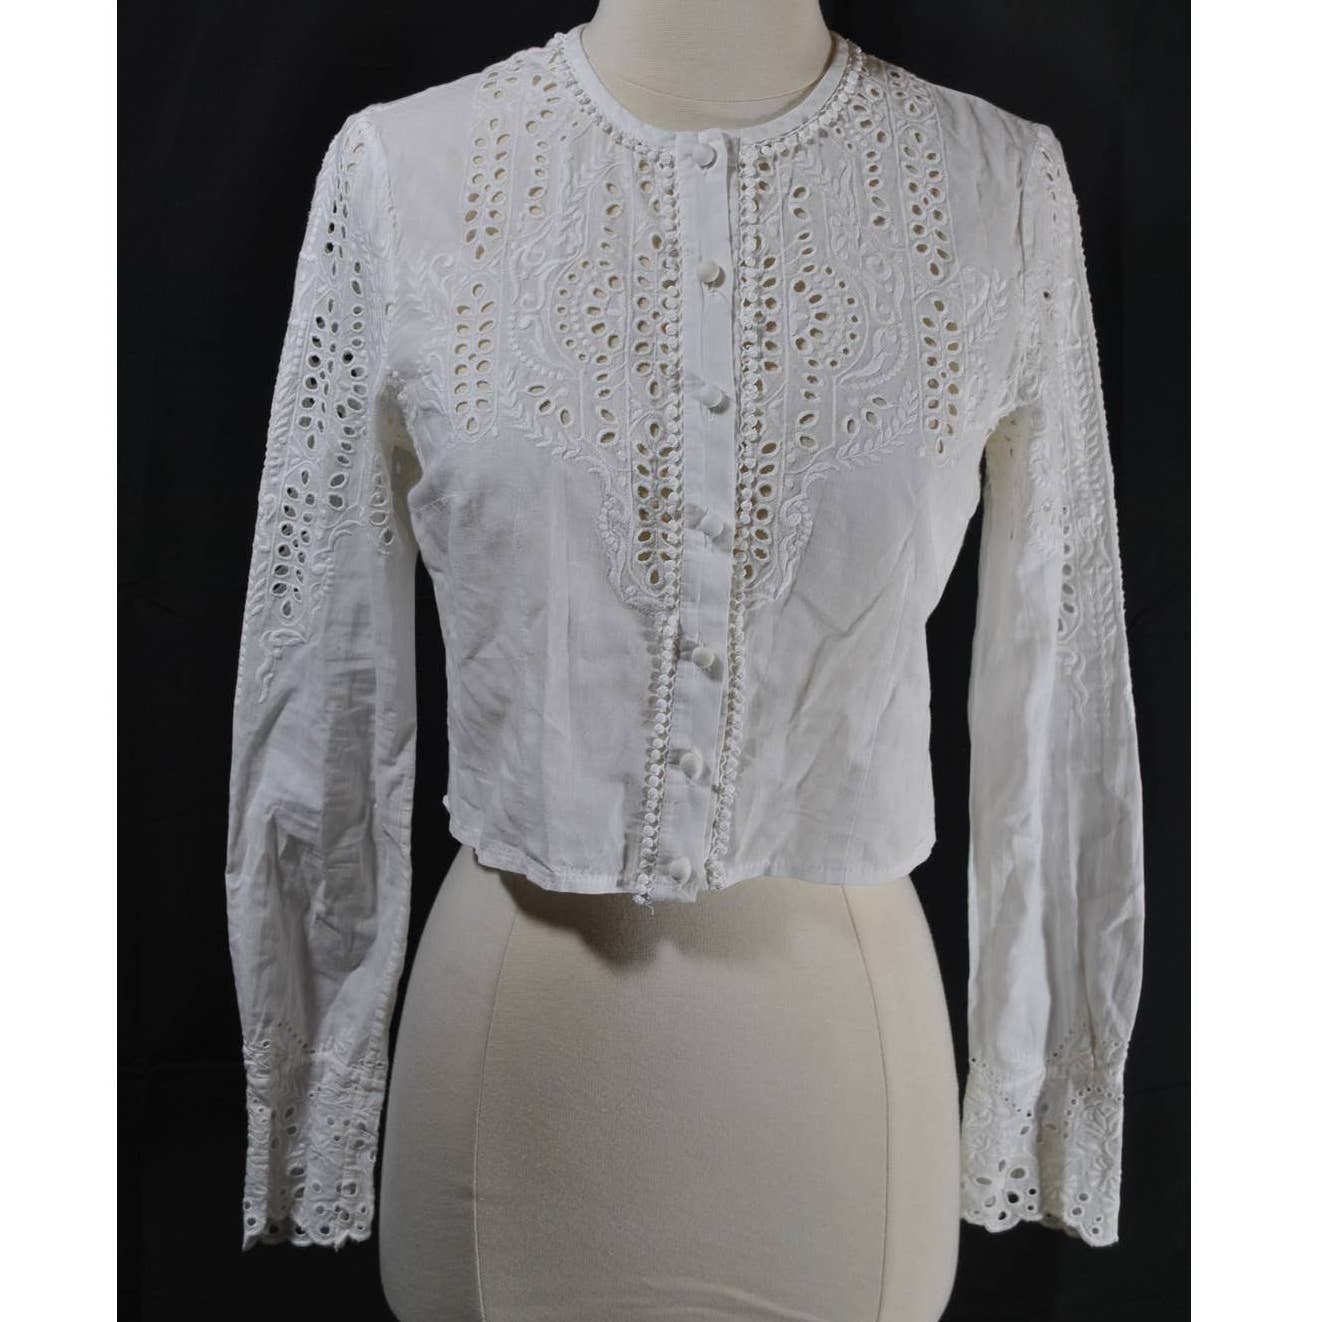 Yigal Azrouel Cropped Button Up Eyelet Top- XS (no size tag)